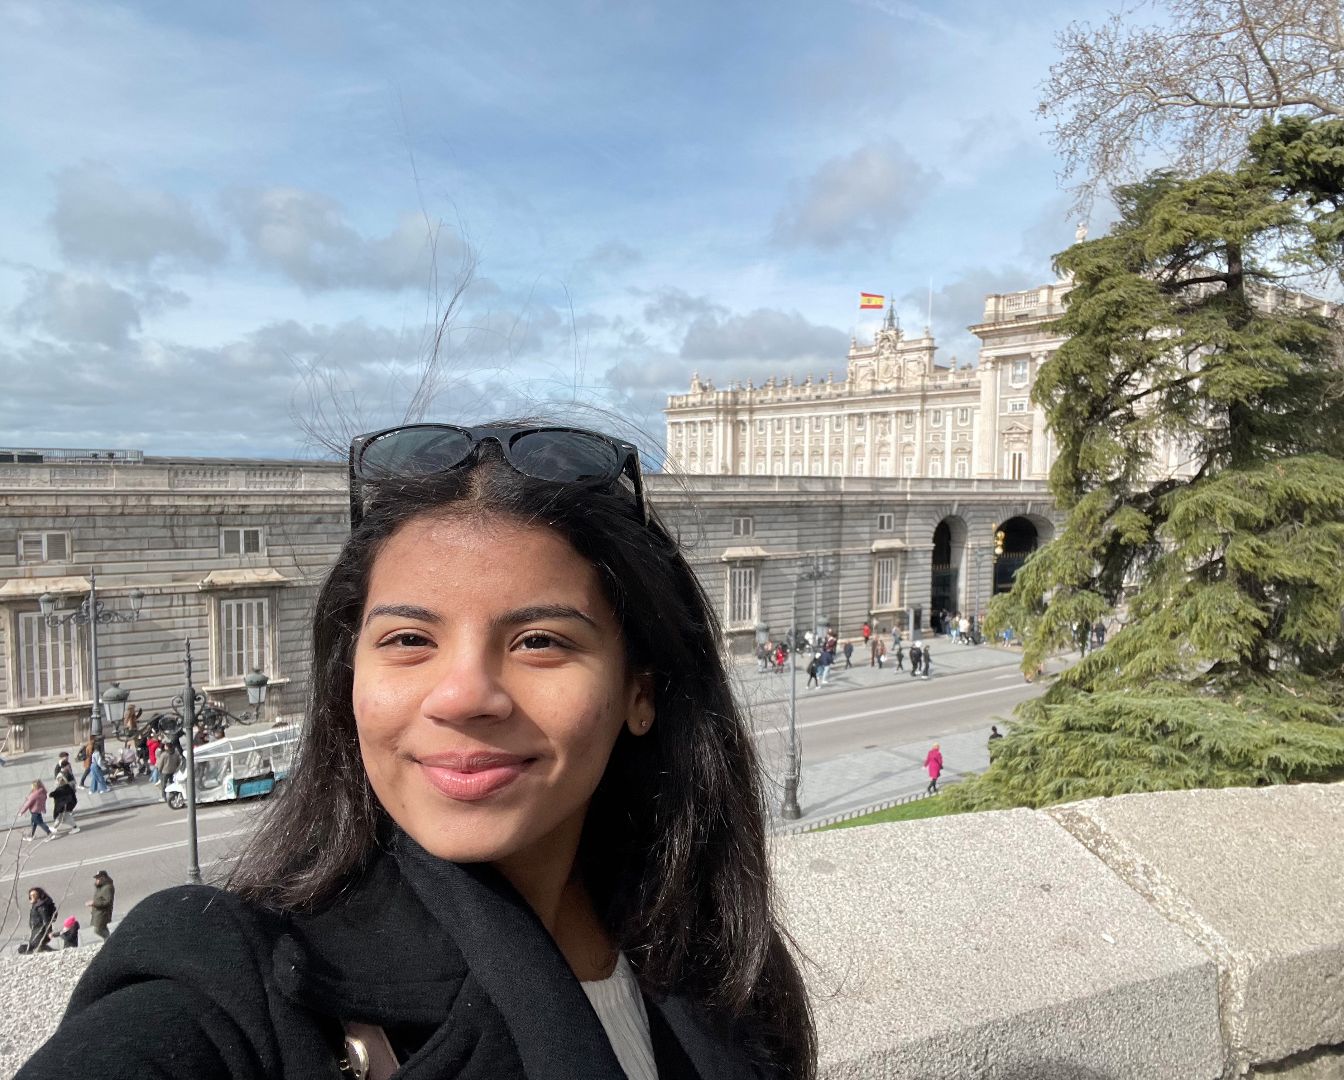 Emily taking a selfie in front of historical building in Madrid